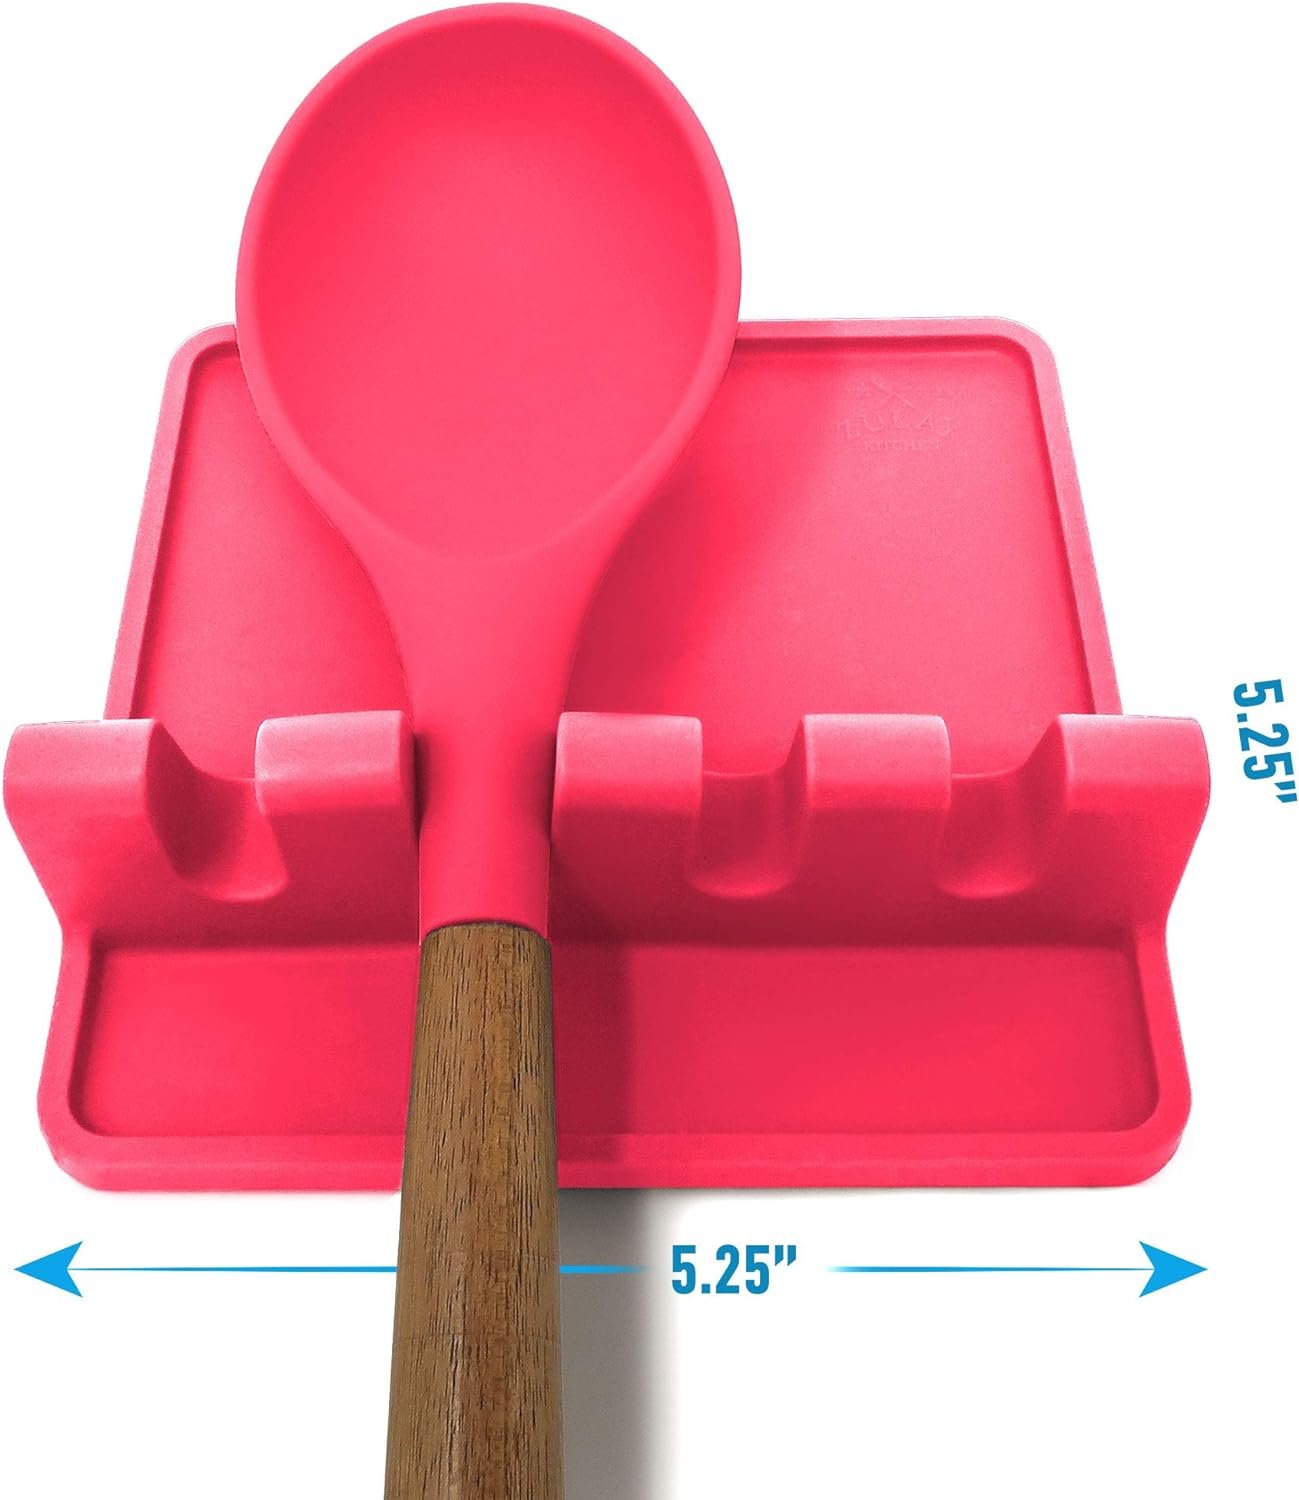 Zulay Kitchen Silicone Utensil Rest - Heat-Resistant Spoon Rest with Drip Pad for Multiple Utensils - Spoon Holder for Stove Top, Kitchen Utensil Holder for Spoons, Ladles, Tongs  More